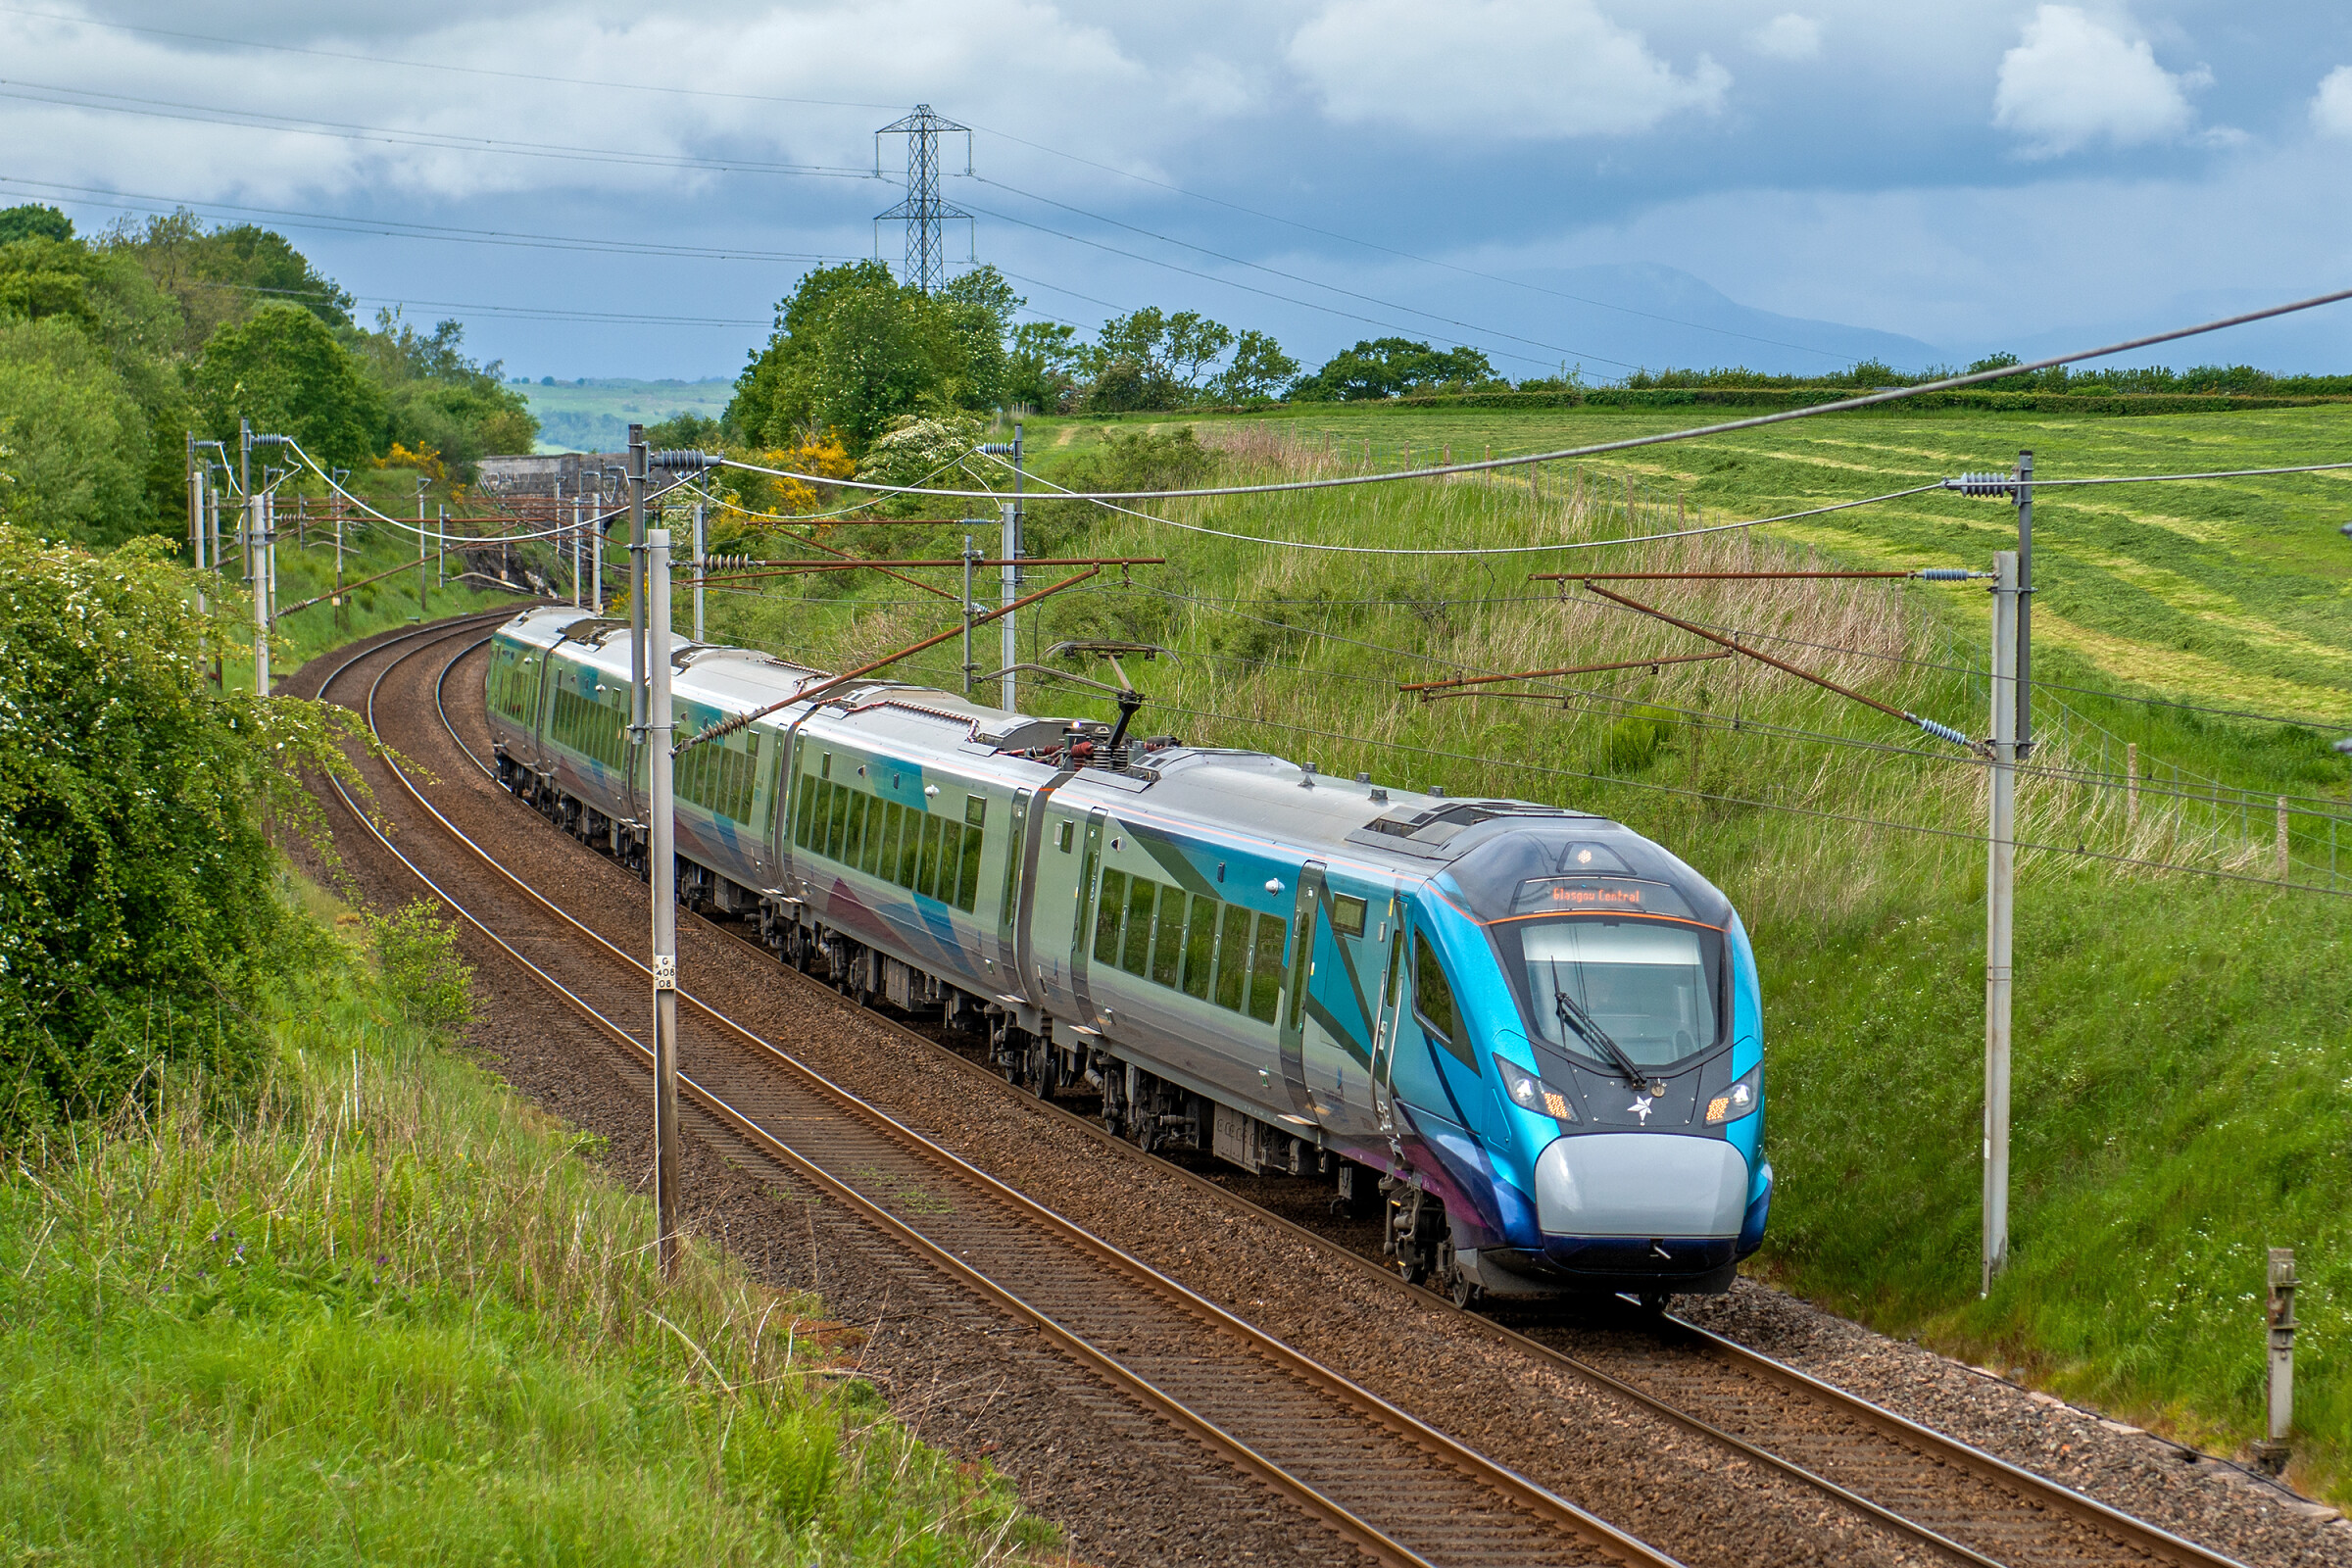 class-397-of-tpe-between-oxenholme-lake-district-and-penrith